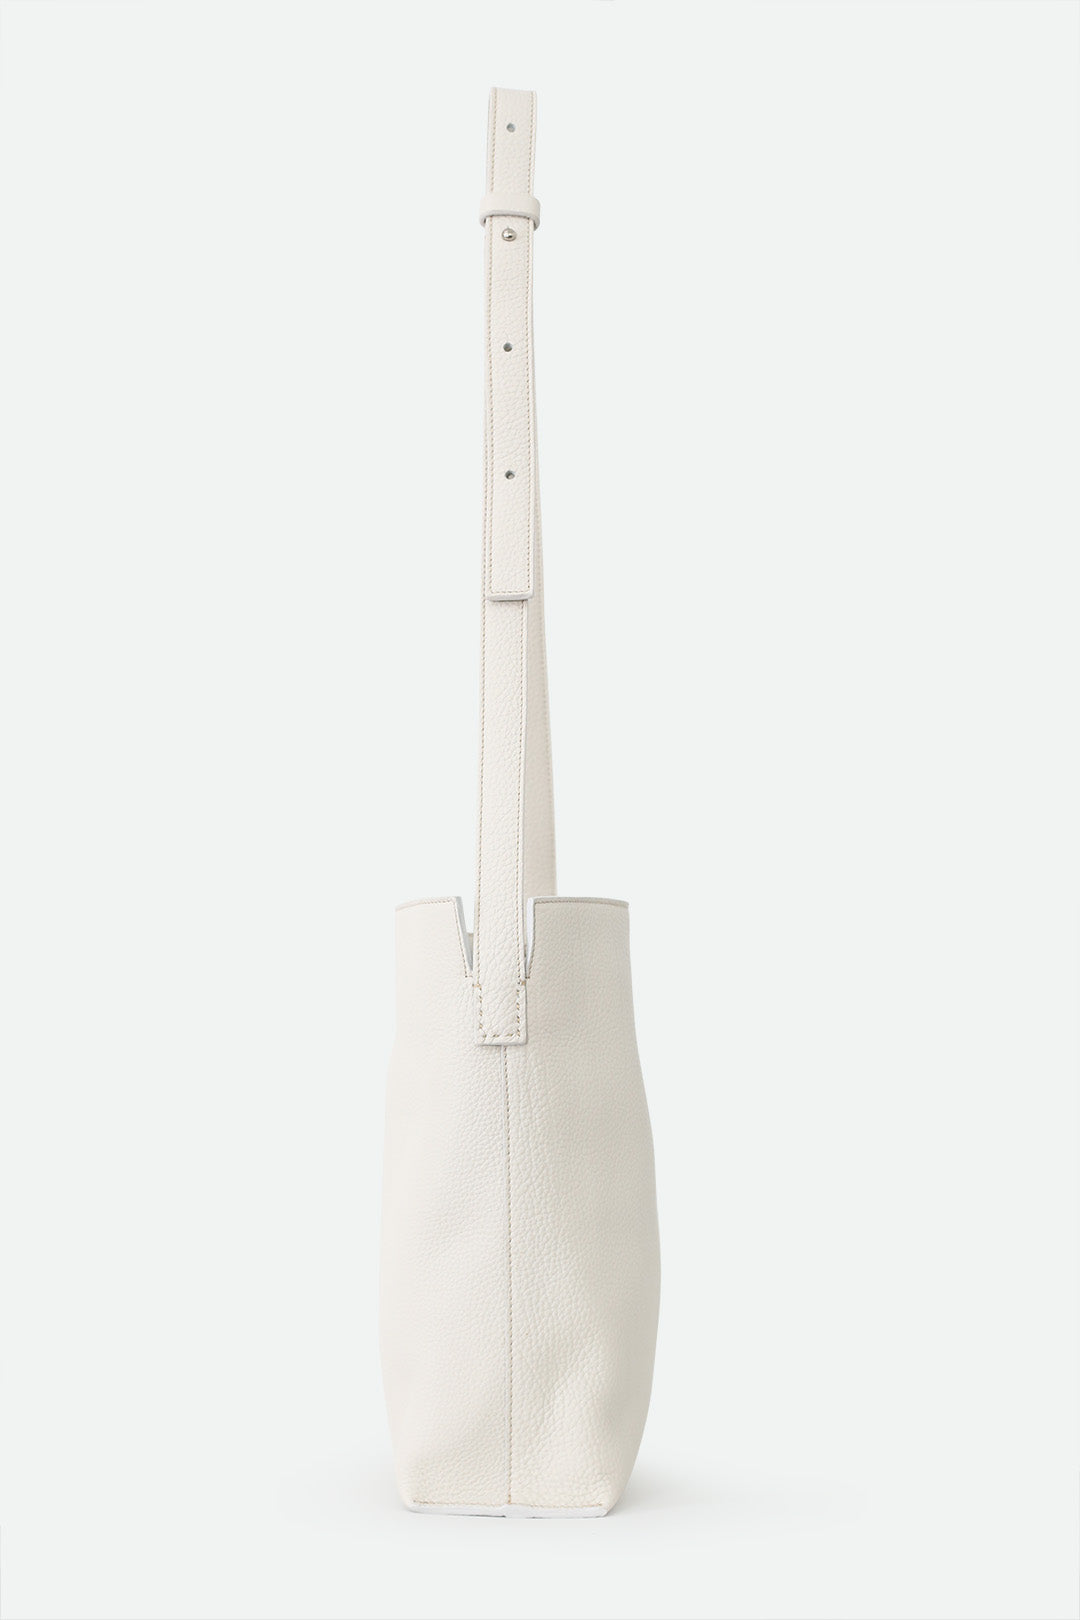 VINCENZA ITALIAN LEATHER BUCKET BAG BUTTER WHITE - PRE-ORDER NOW